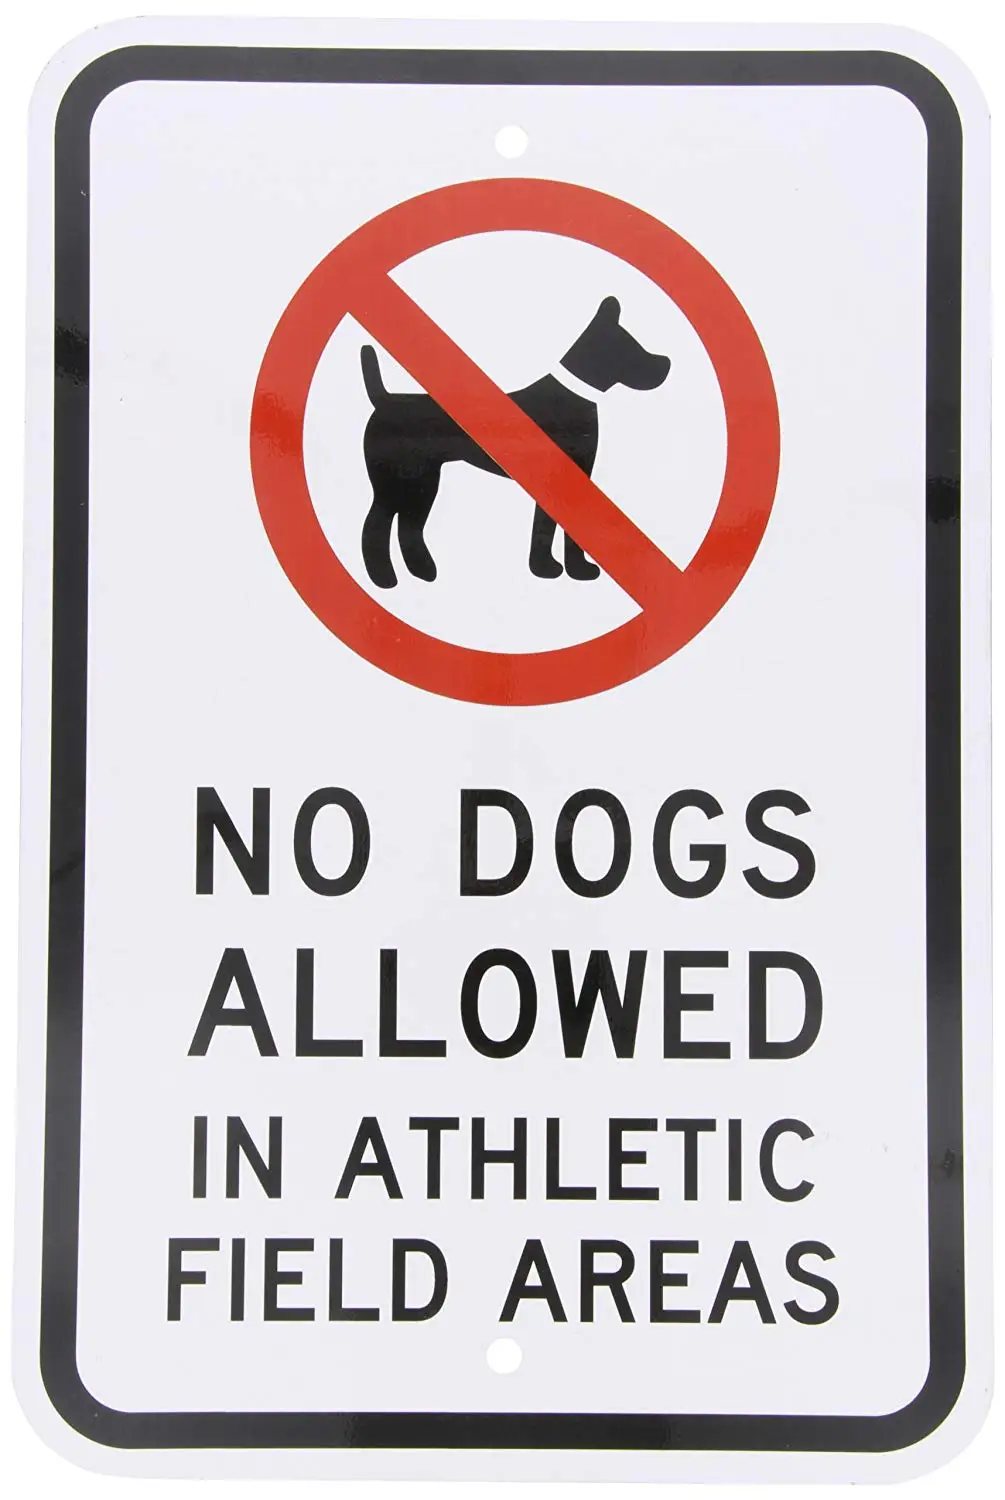 Property is not allowed. Dogs are not allowed. Pets allowed. Not allowed Dog. Dogs are allowed.